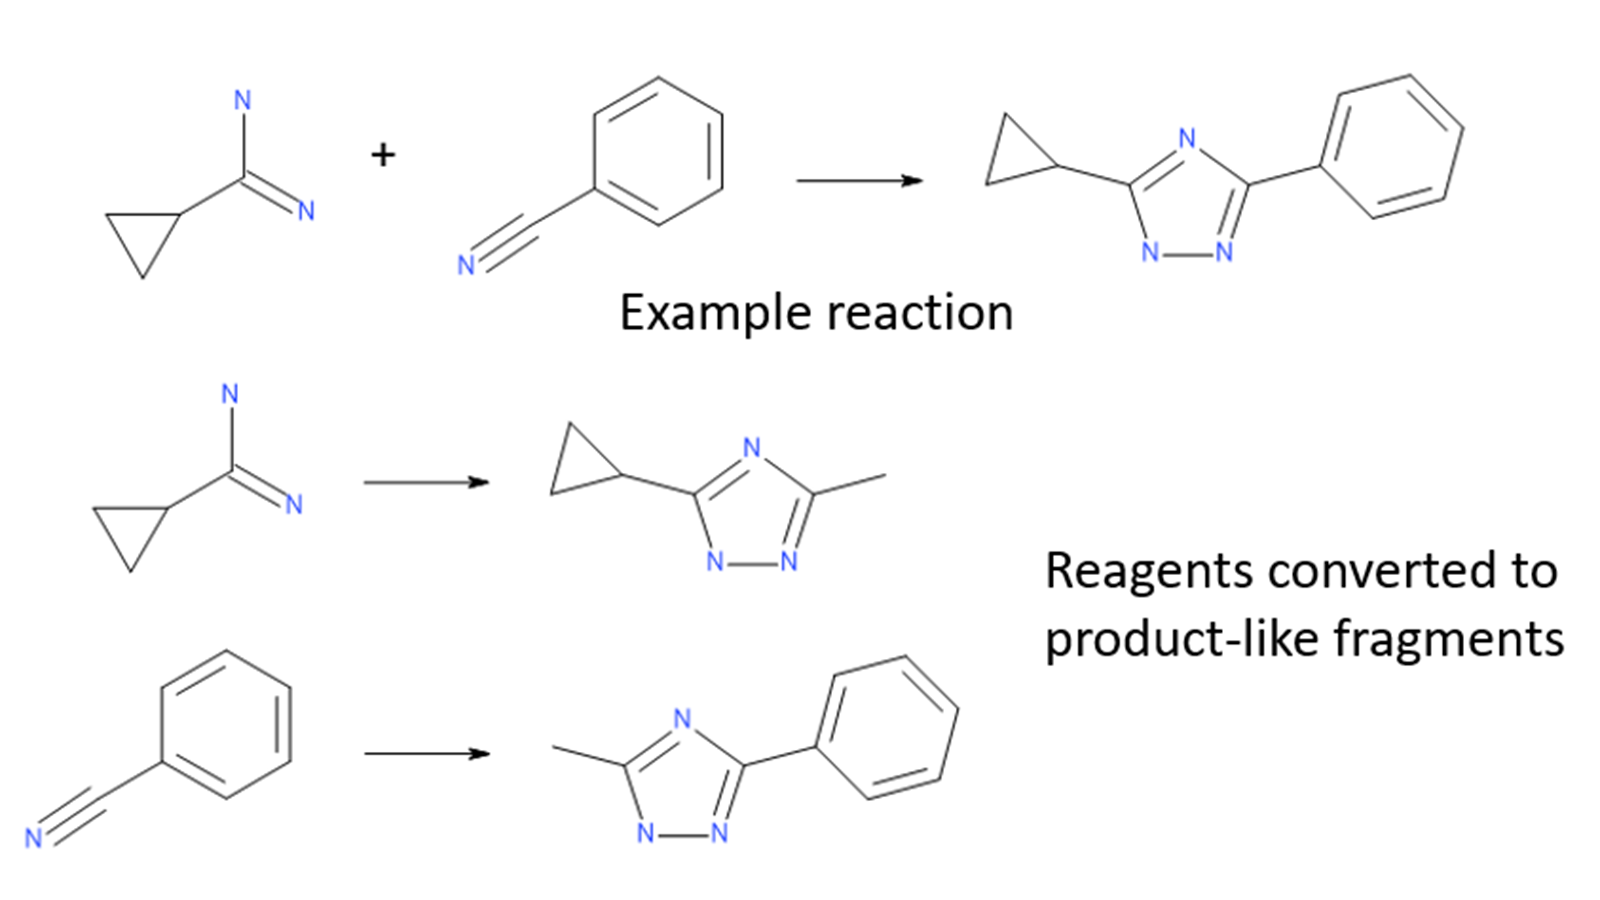 Library reagents are converted to product-like fragments for each reaction